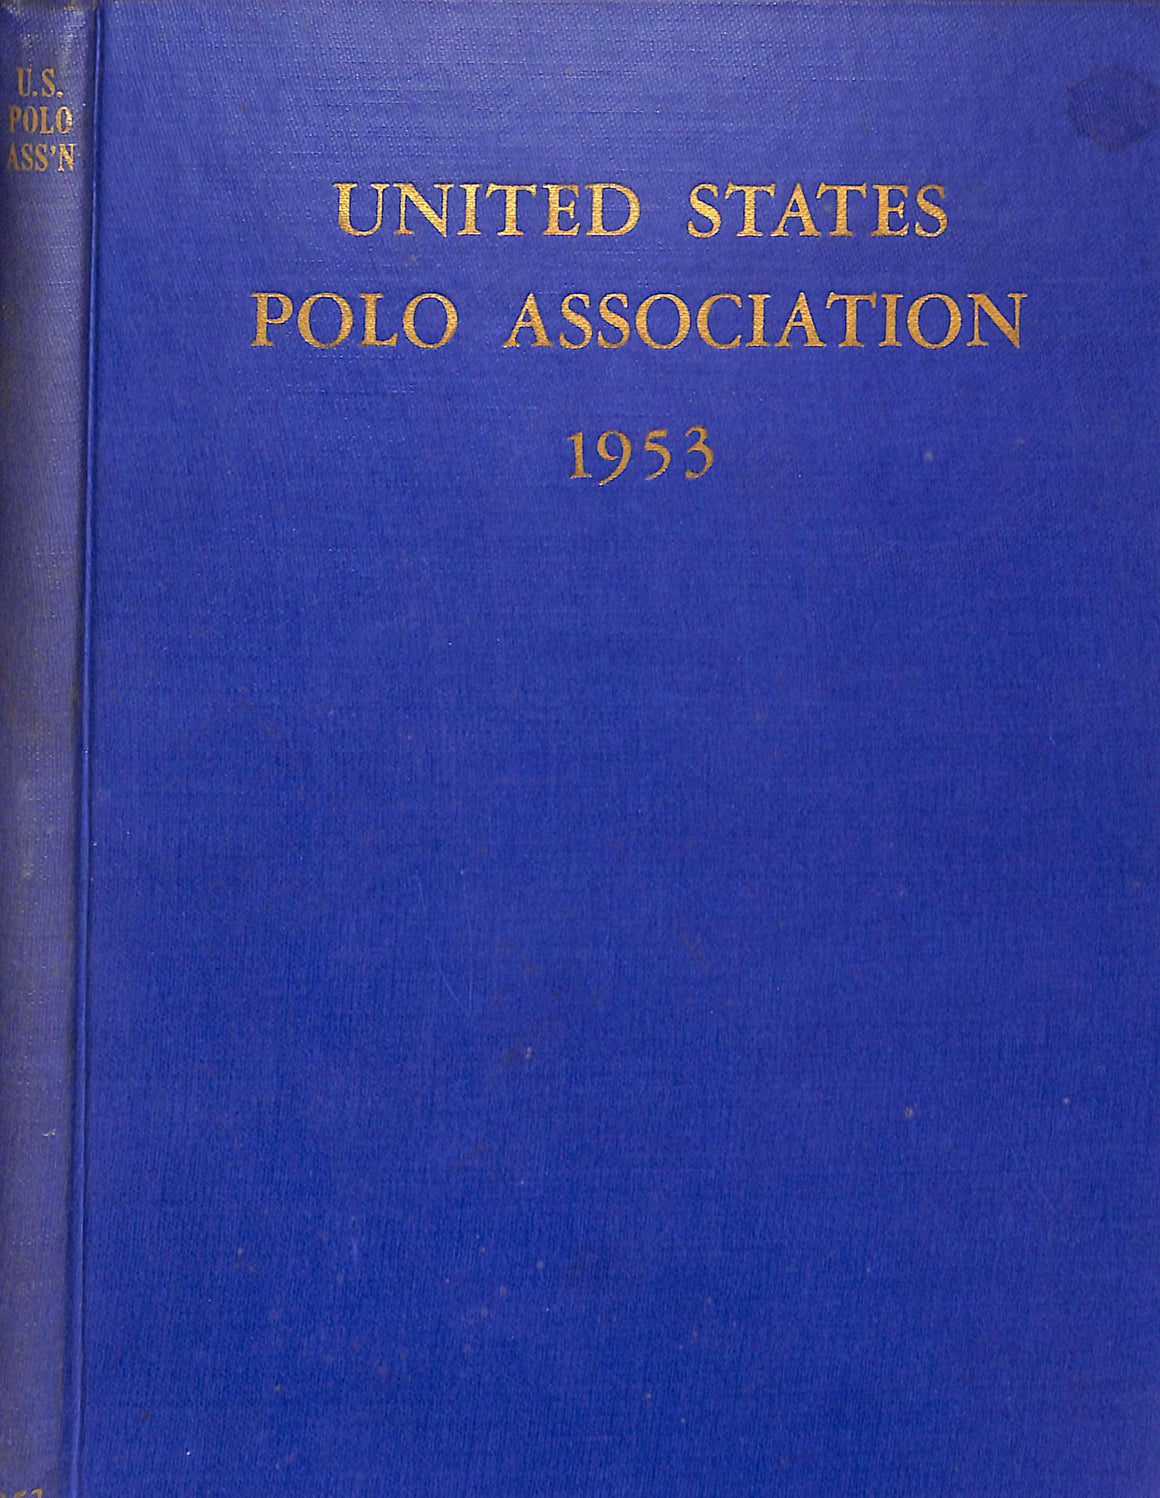 United States Polo Association 1953 Yearbook